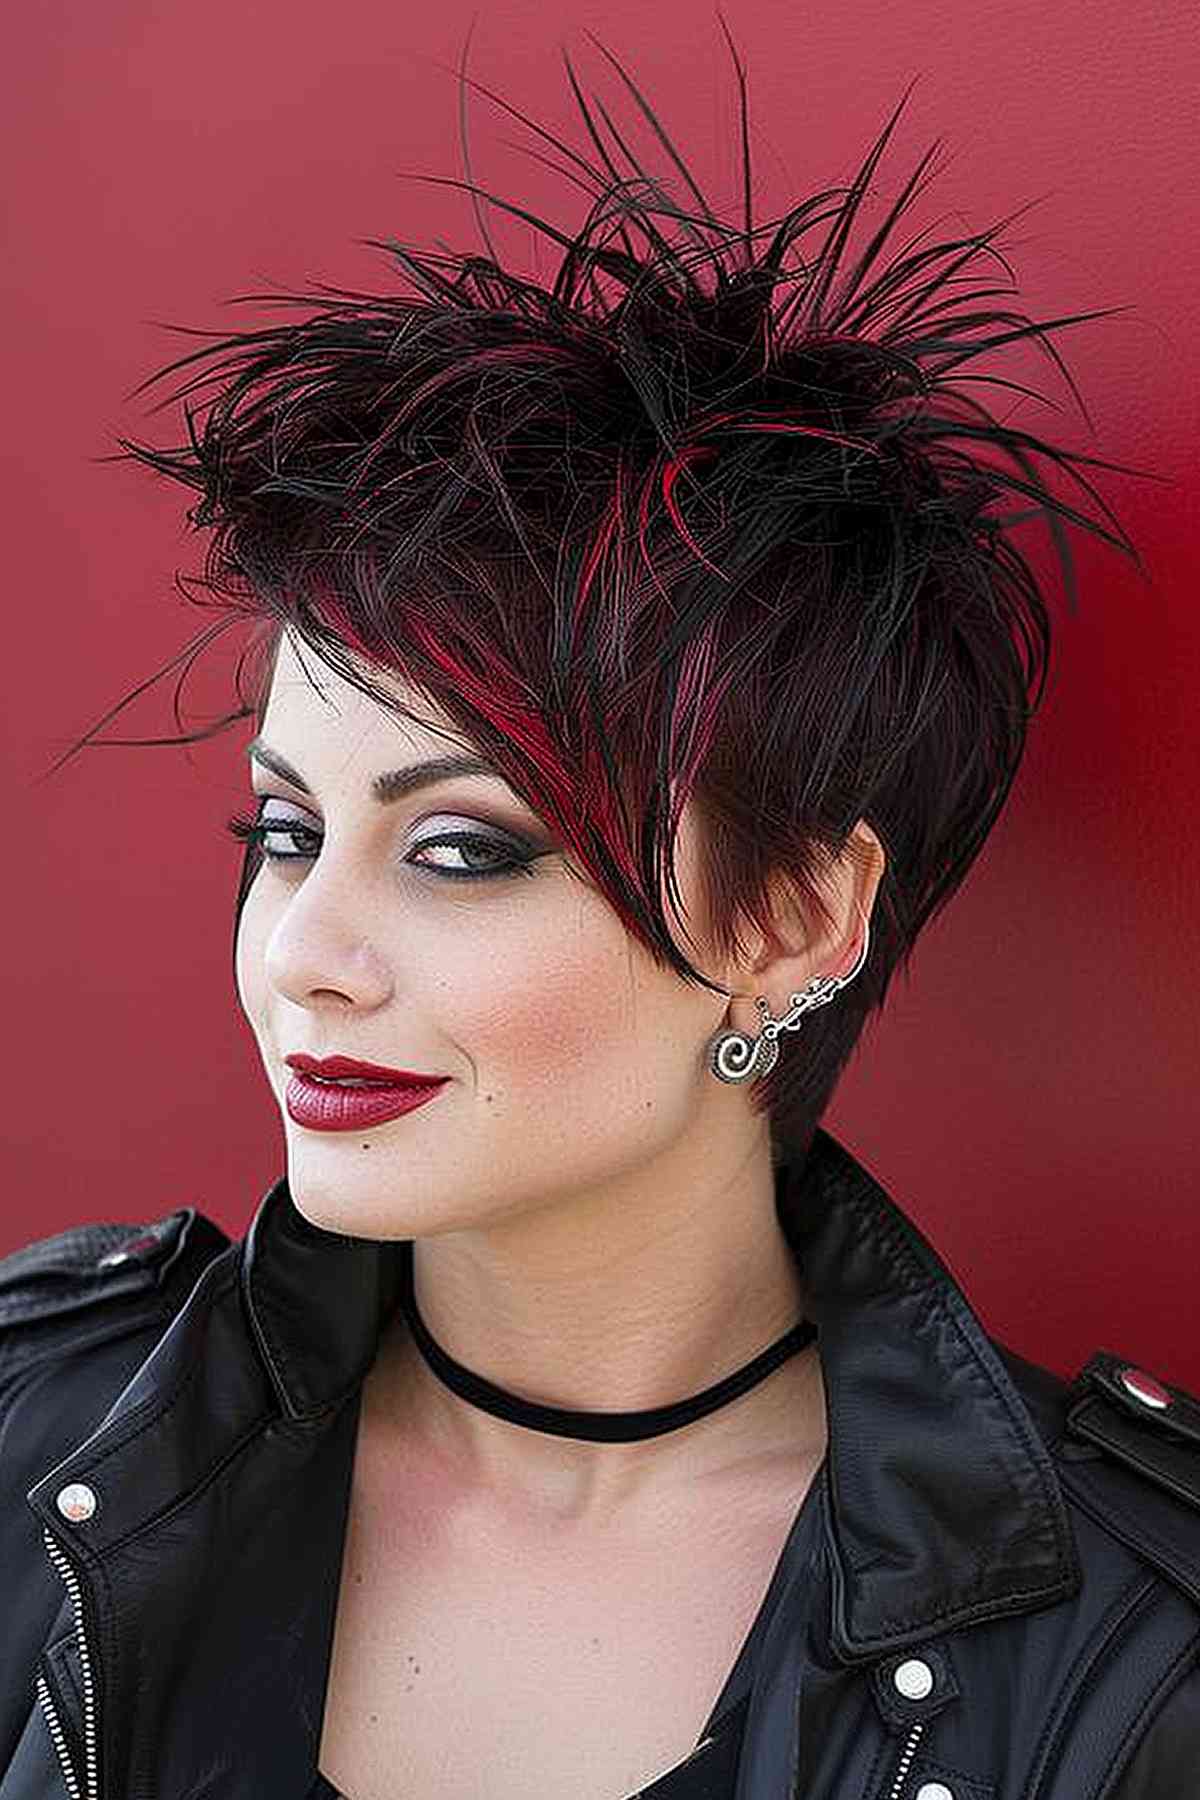 Rock-inspired punk pixie cut with spiky black layers and dramatic red highlights, designed for a bold, voluminous look.